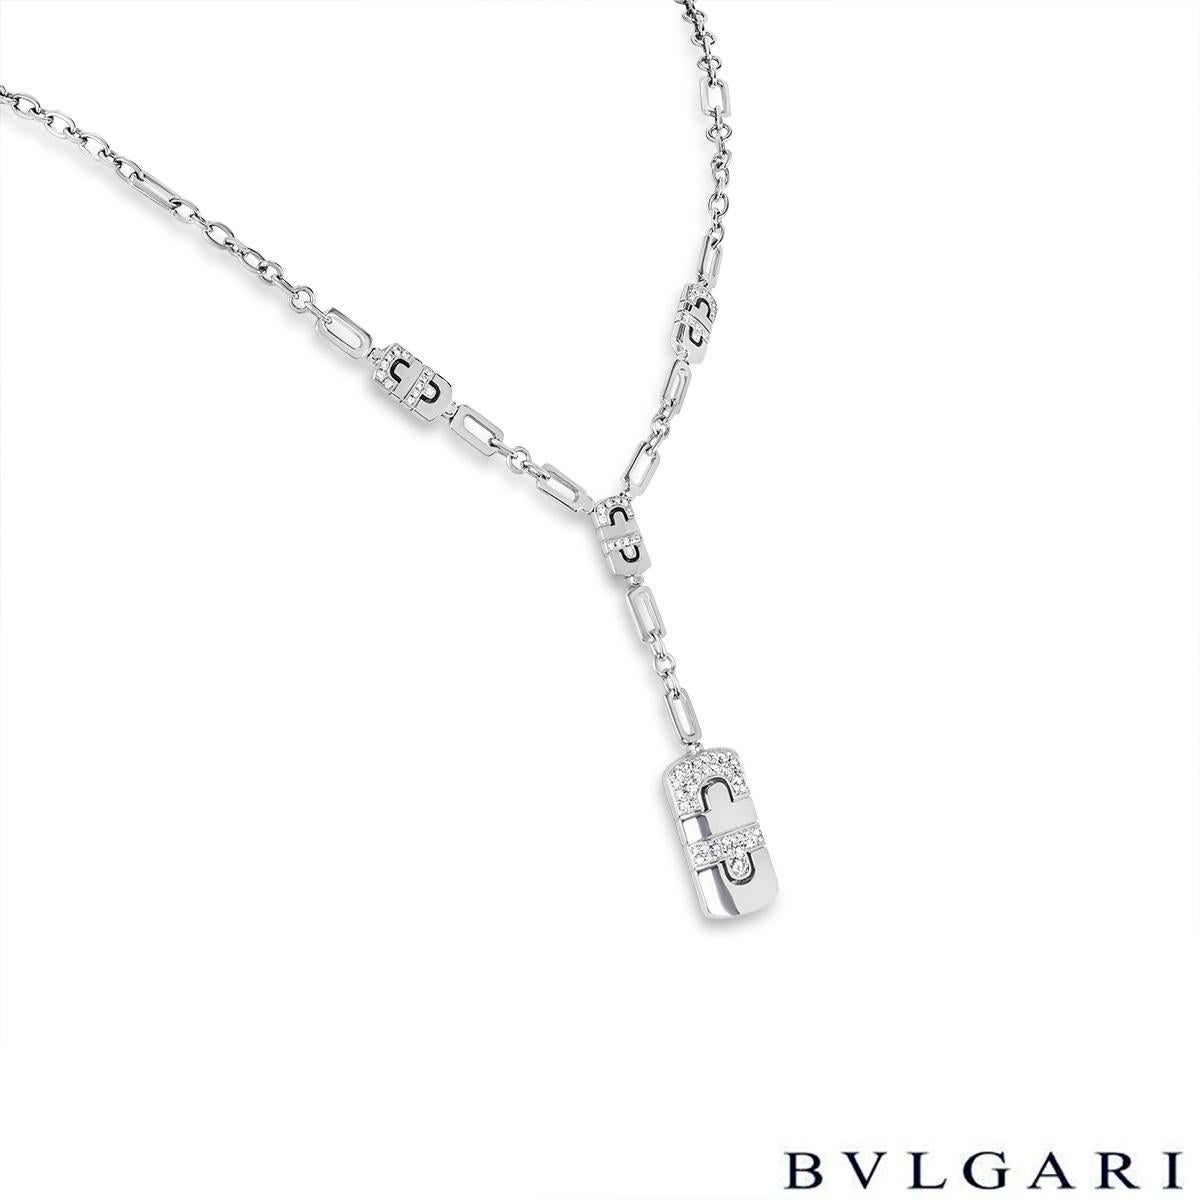 A beautiful 18k white gold diamond necklace by Bvlgari from the Parentesi collection. The necklace is in a lariat style with 1 large diamond set Parentesi pendant and 3 mini Parentesi diamond set stations. The 68 round brilliant cut diamonds pave